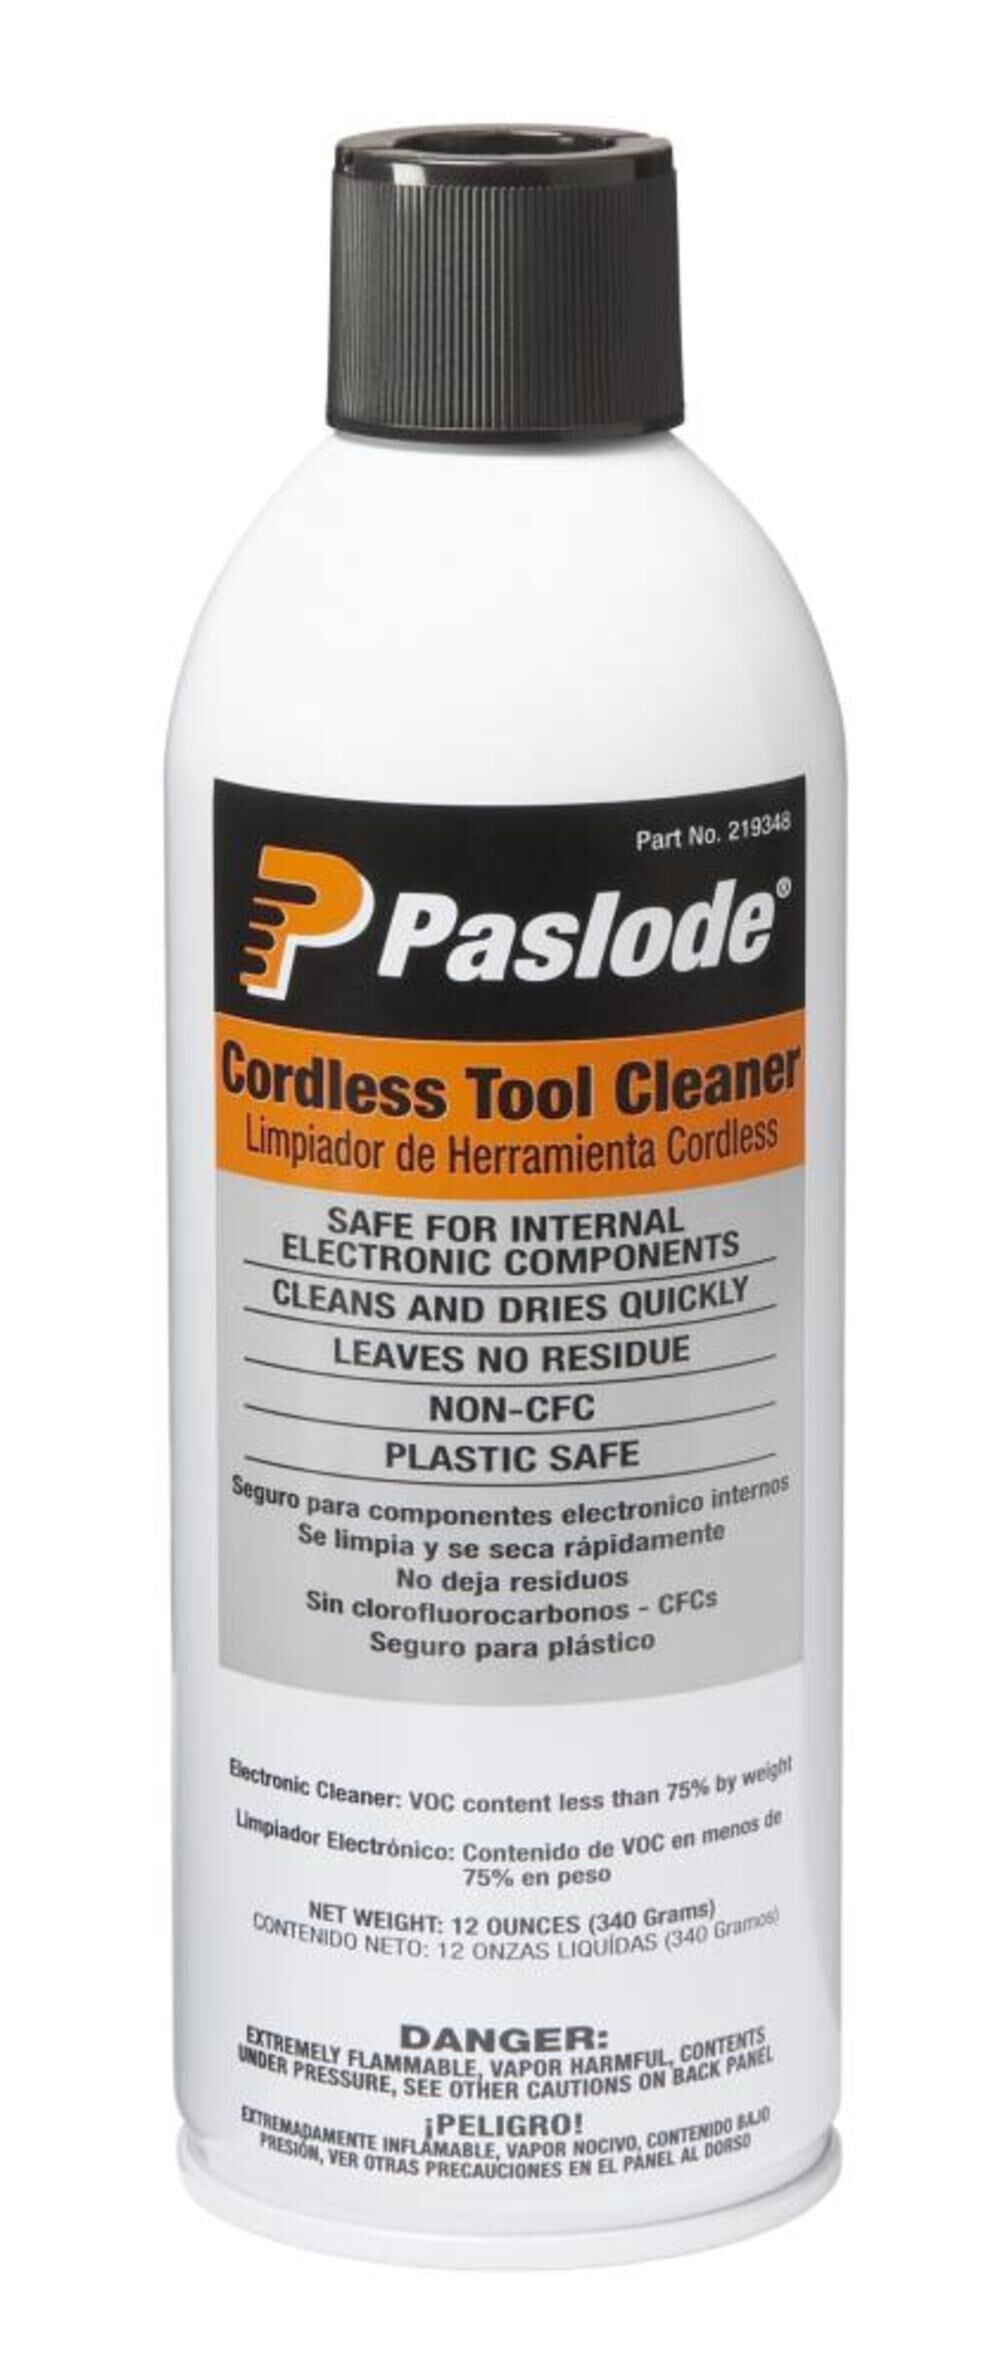 Cordless Tool Cleaner 219348